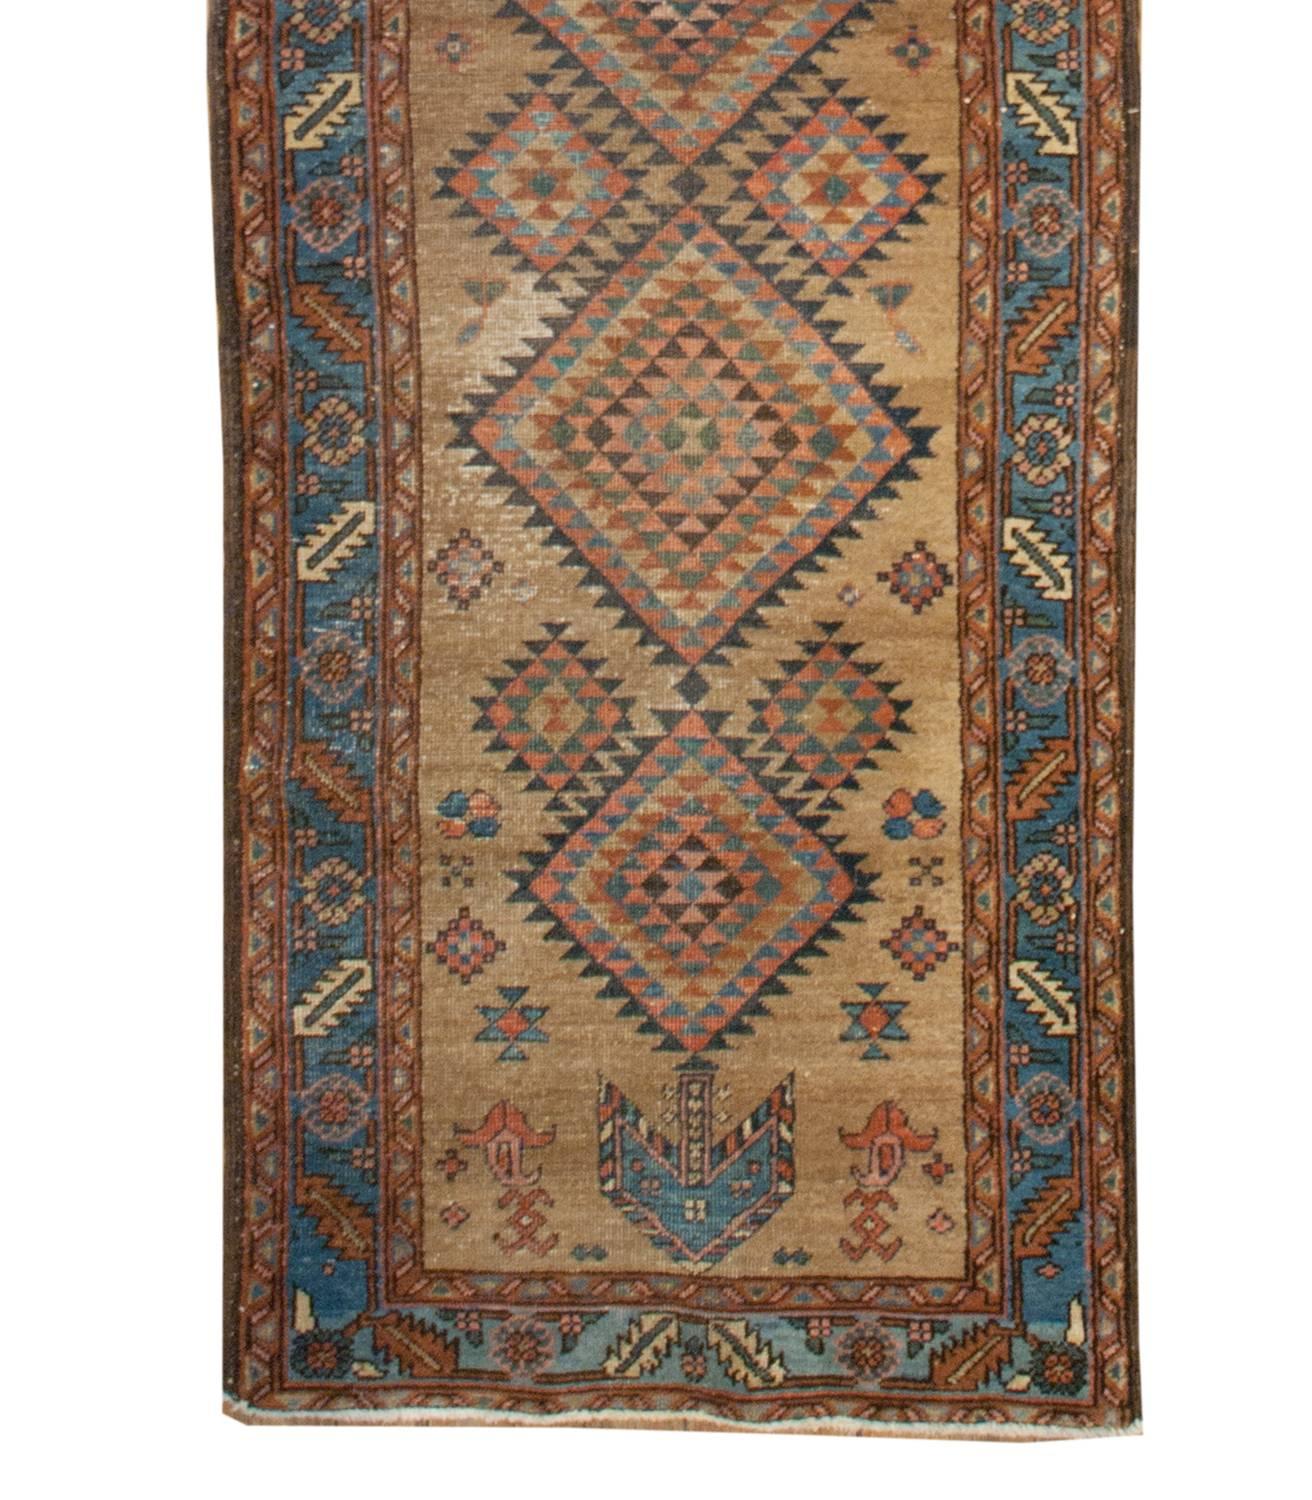 An amazing 19th century Persian Heriz runner with a wonderful pattern of multi-colored diamonds running down the center of a natural camel hair field, amidst a field of flowers.  The border is whimsical with a floral and leaf pattern on a light